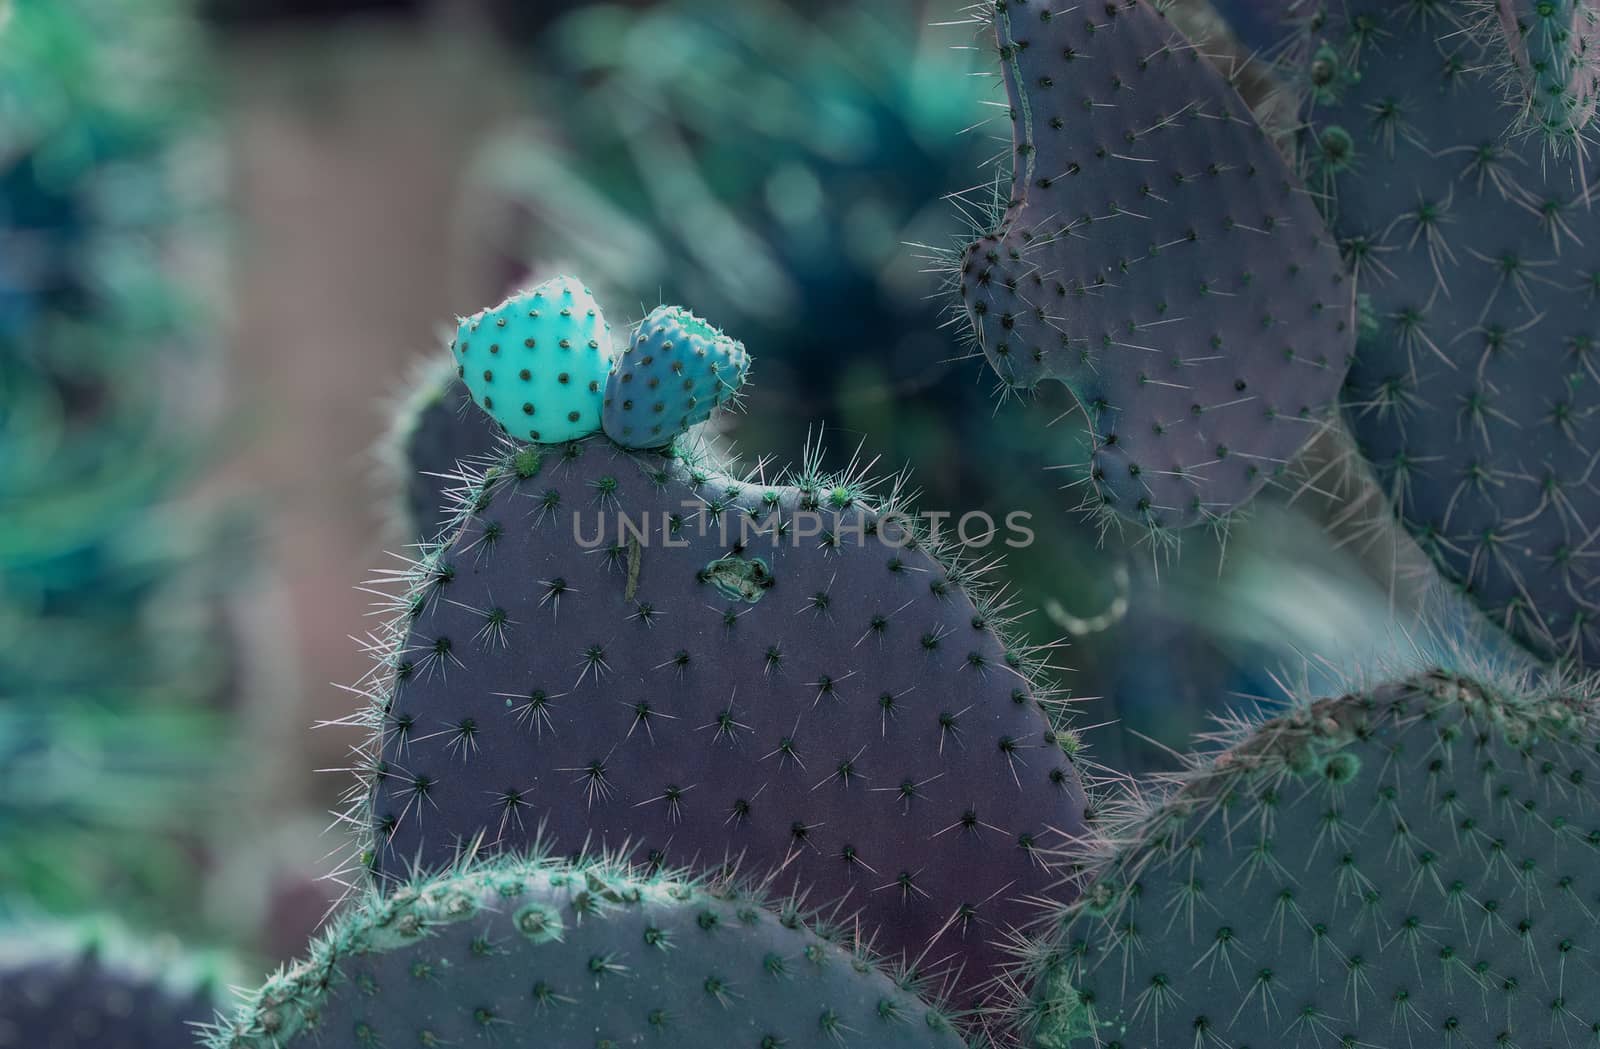 Surrealistic abstract glow thorny cactus with spikes and little fruits 